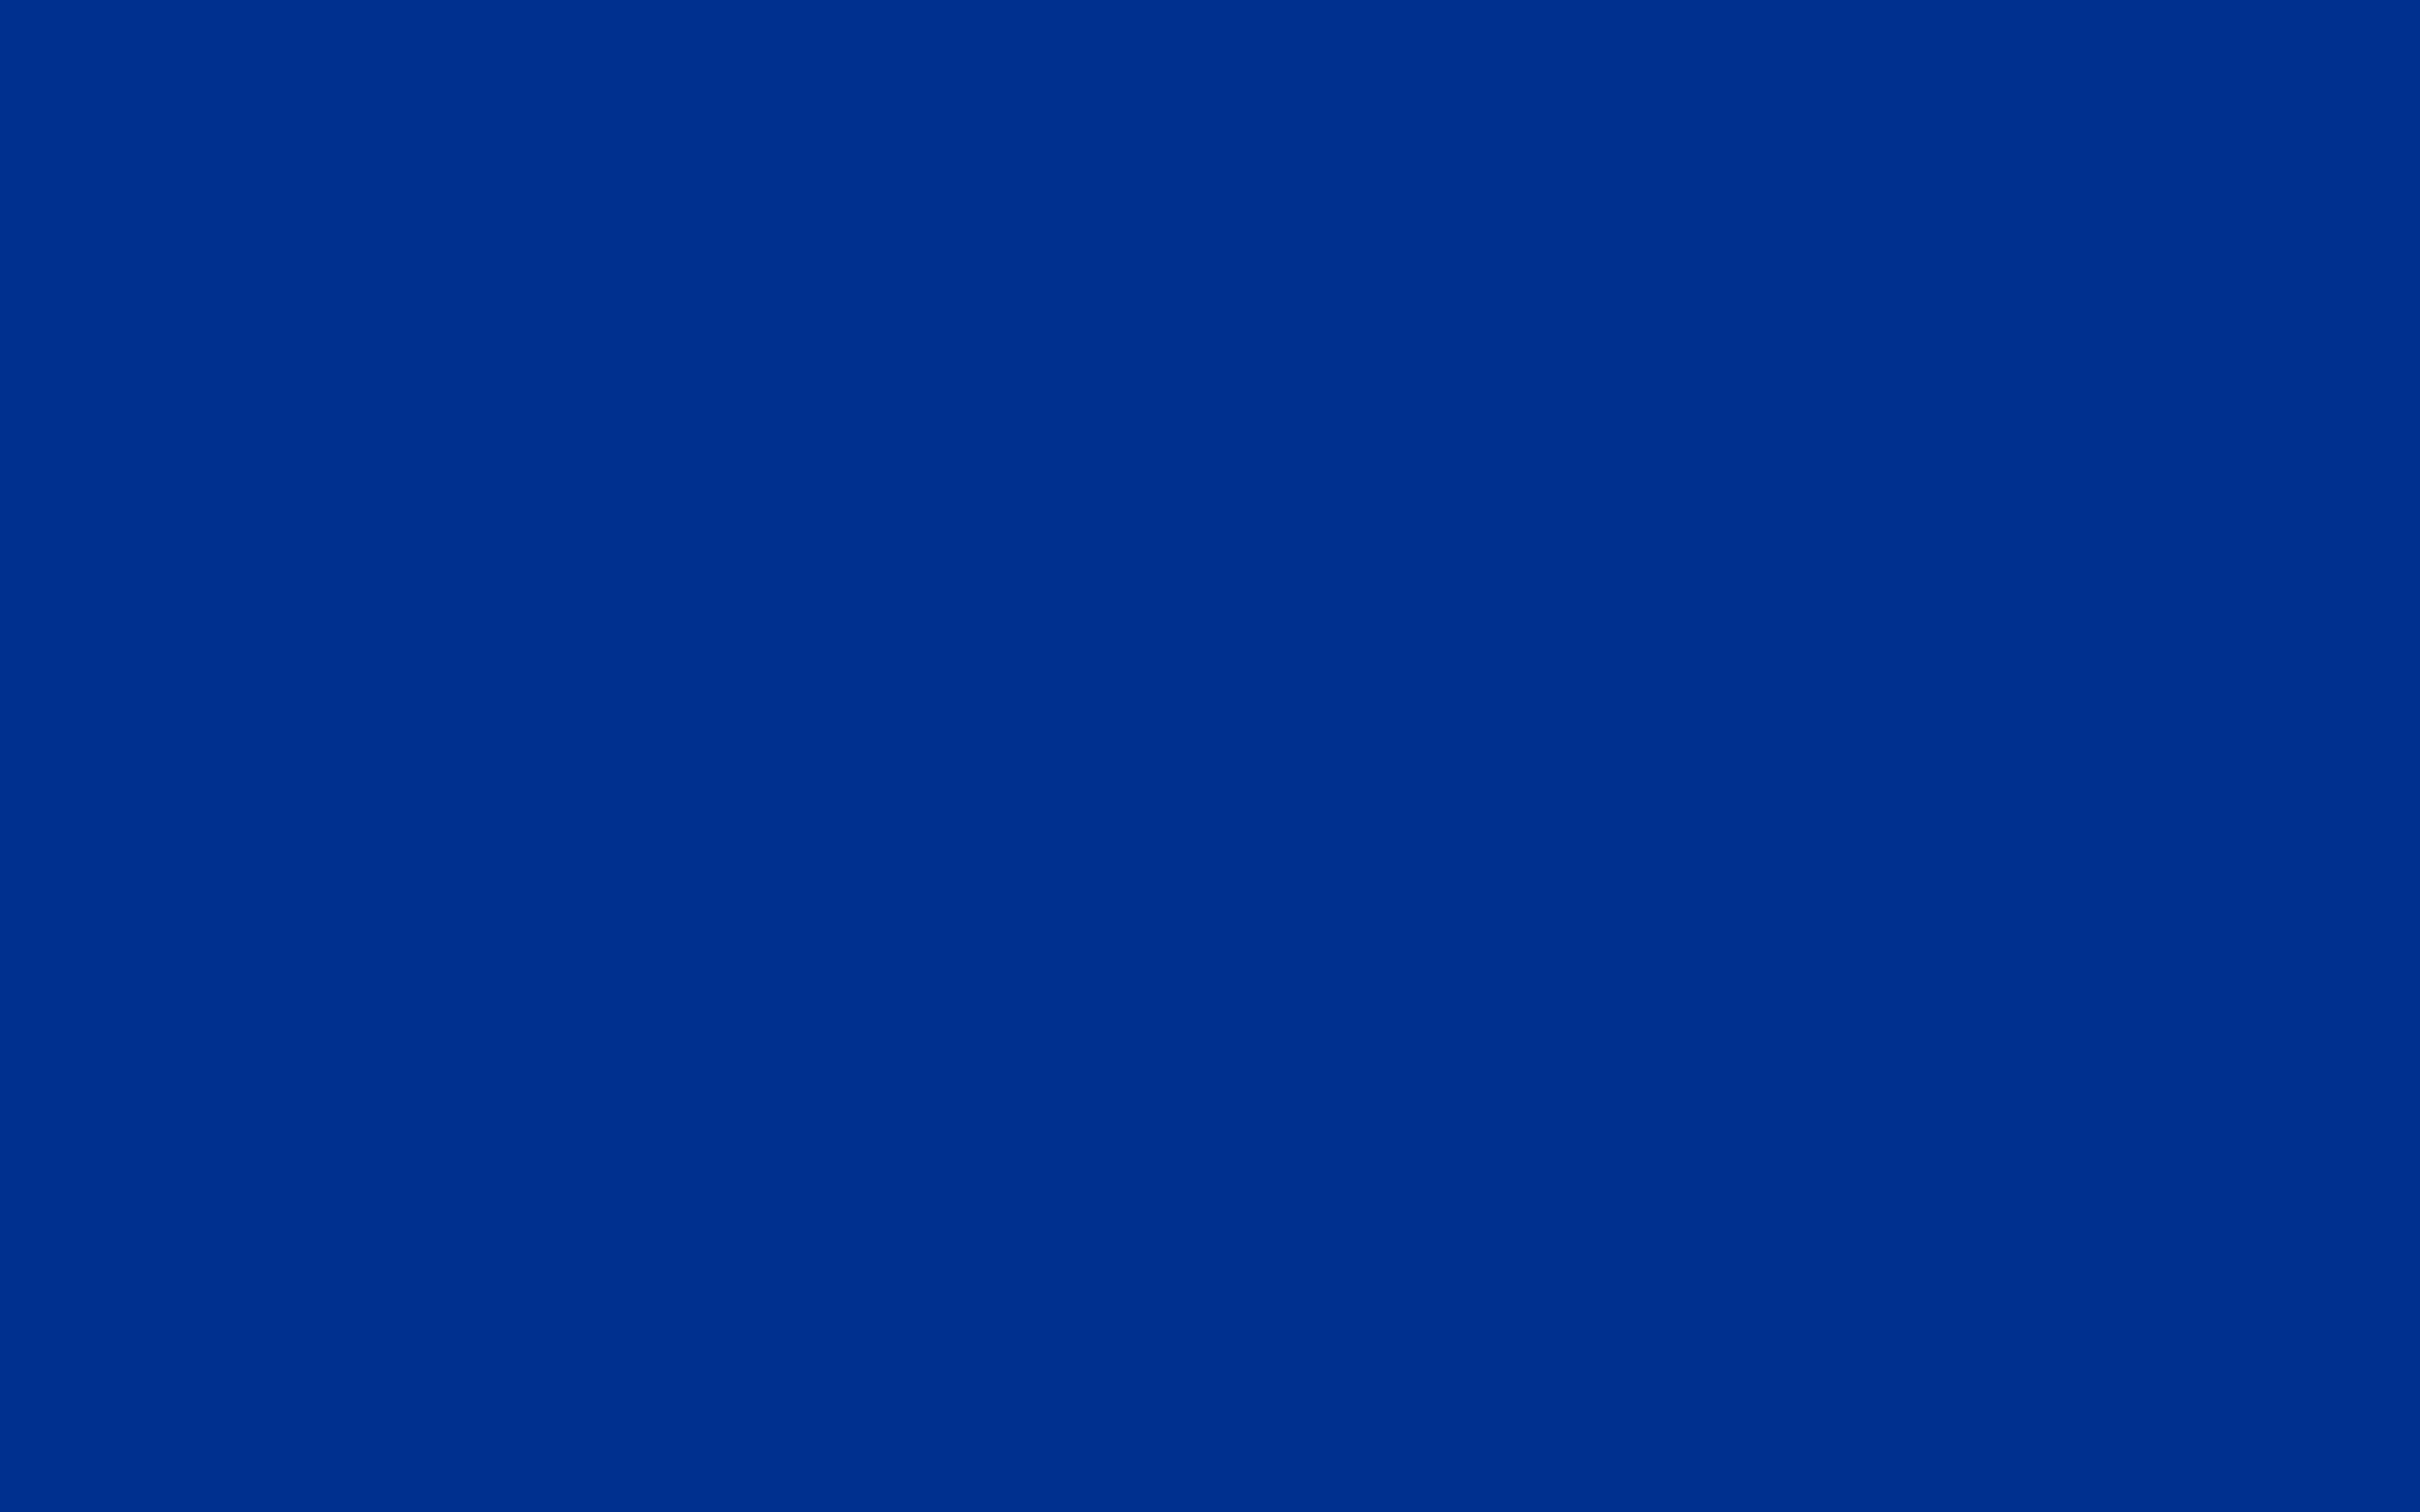 Solid Royal Blue Background Air Force Dark